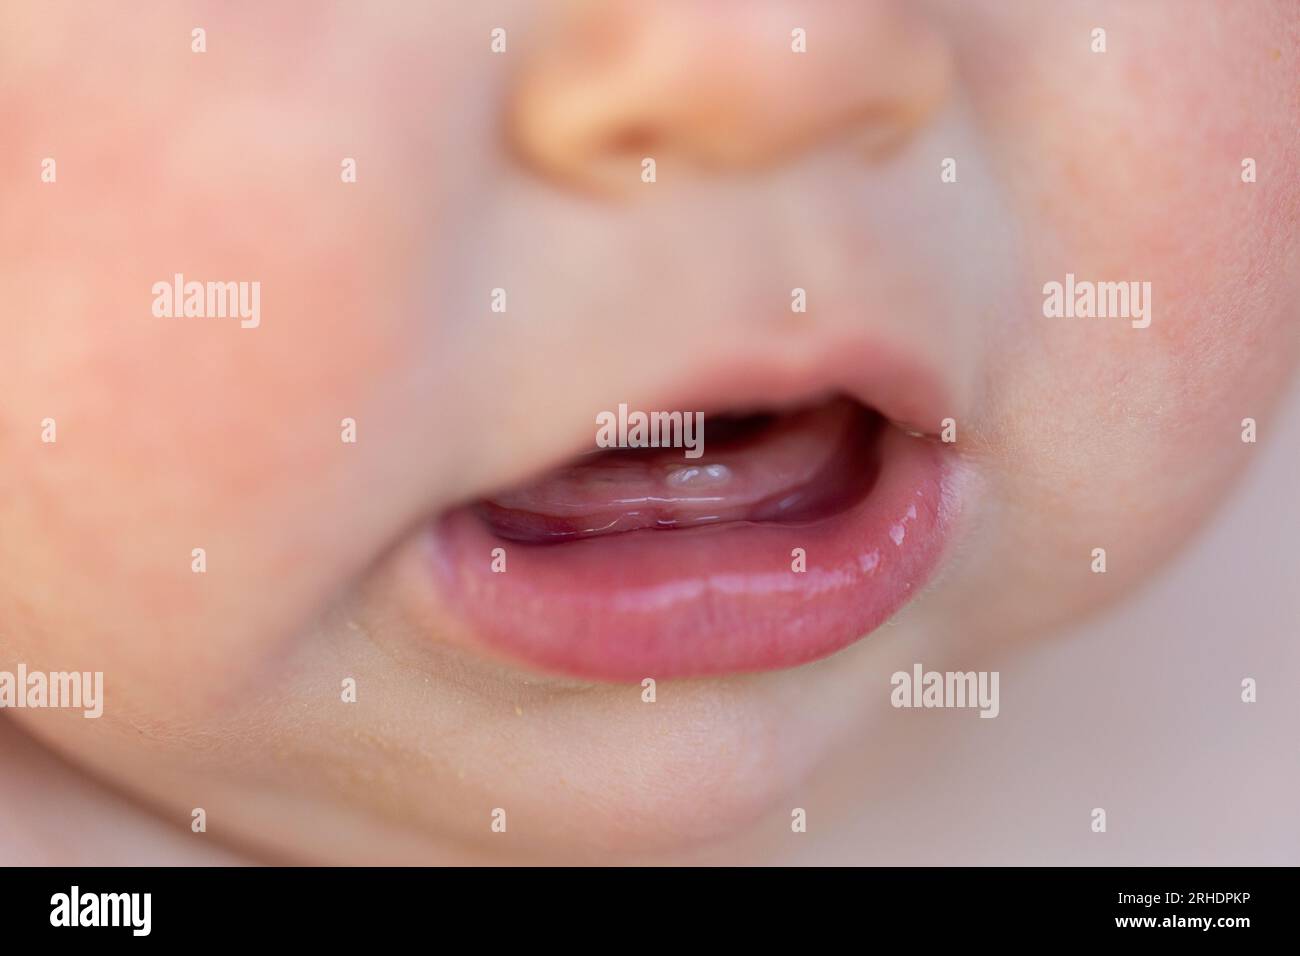 Baby's mouth with first tooth breaking through gum close up Stock Photo